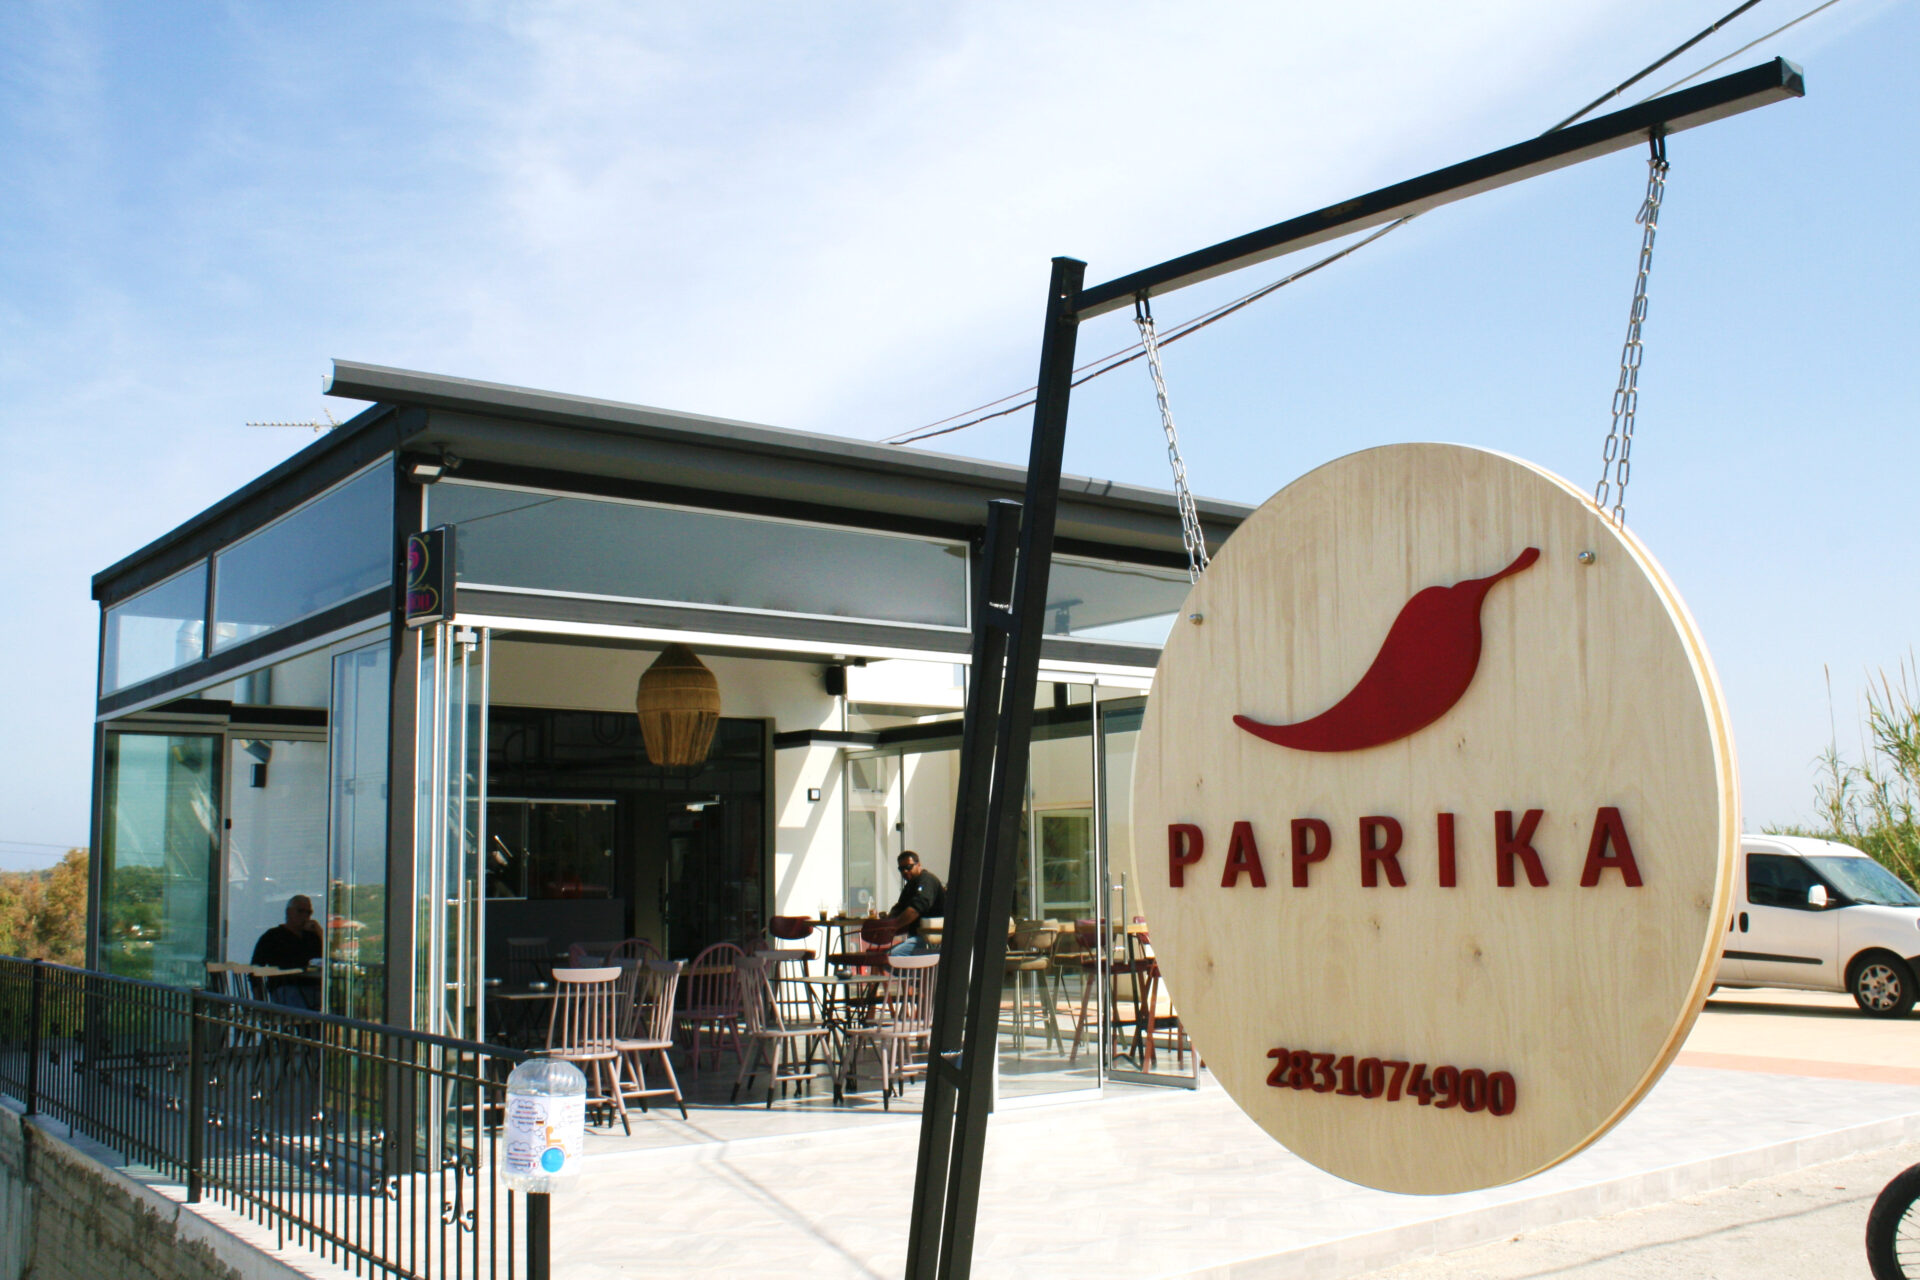 Paprika - The Grill Experience sign